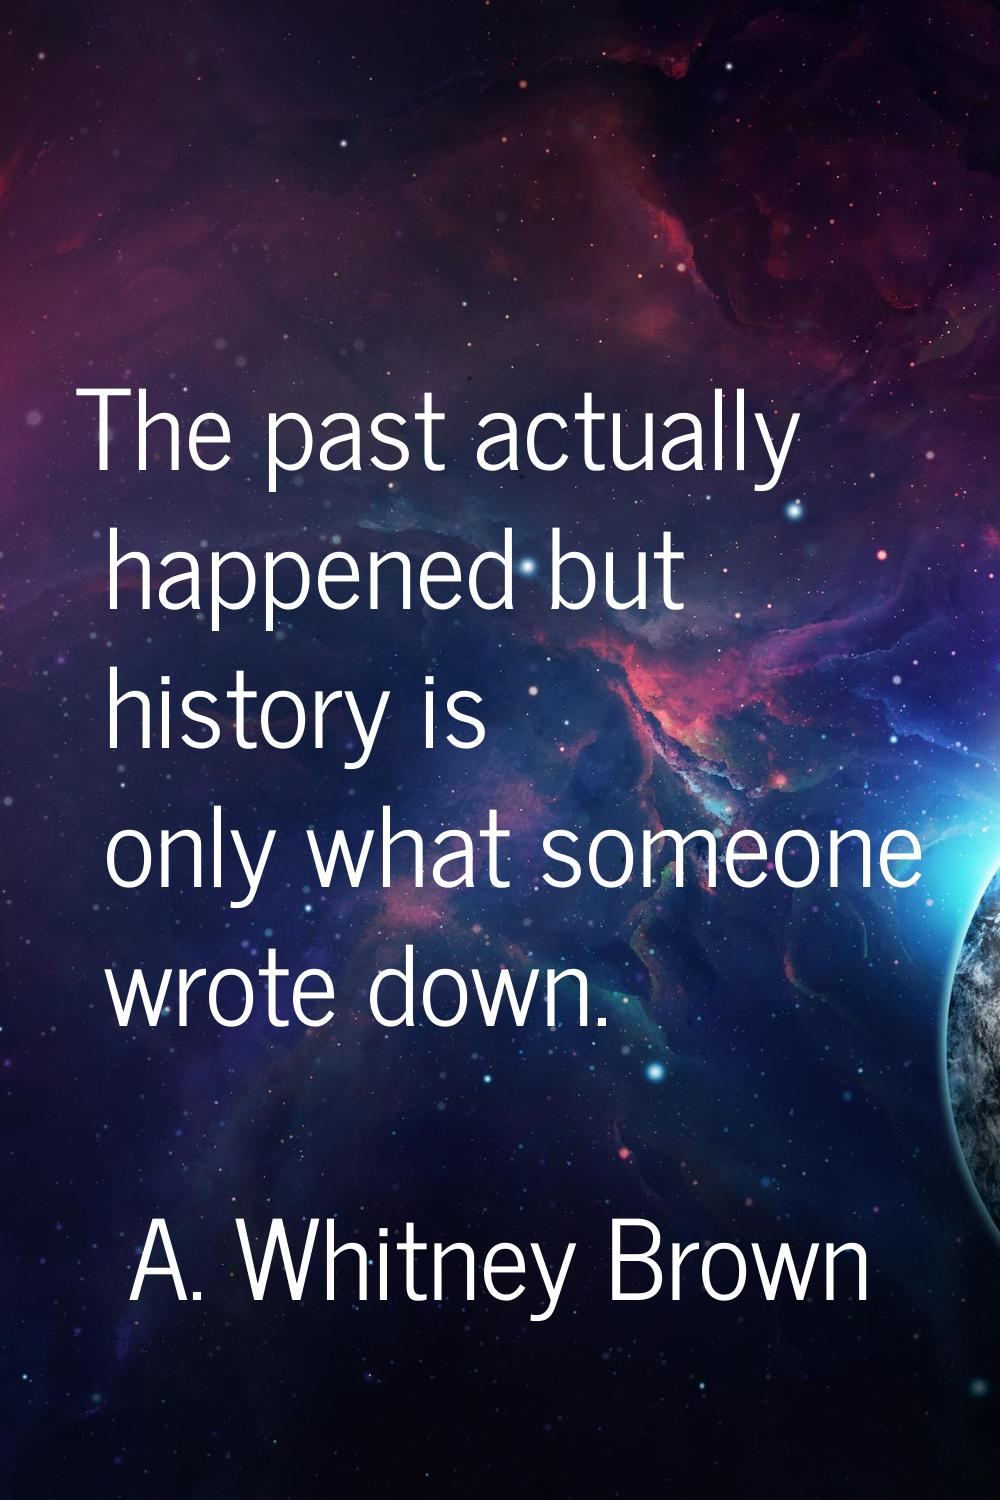 The past actually happened but history is only what someone wrote down.